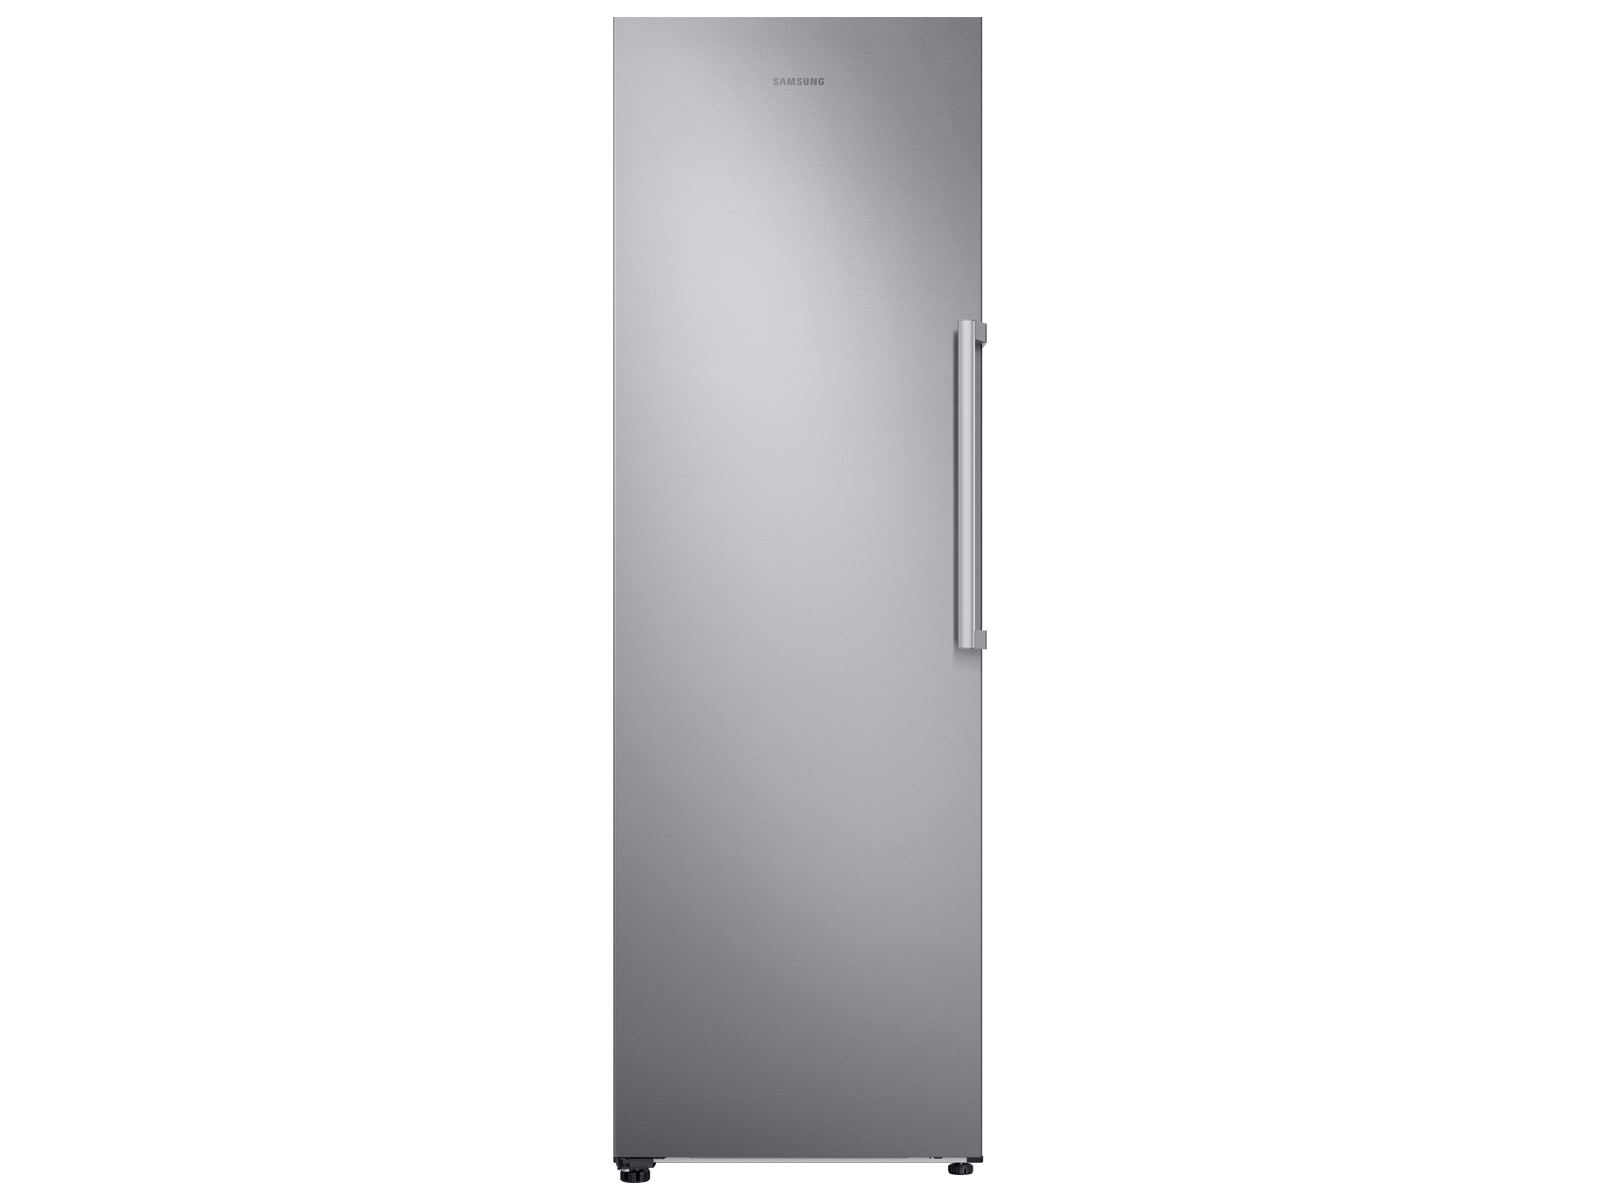 RZ11M7074SA/AA, 11.4 cu. ft. Capacity Convertible Upright Freezer in  Stainless Look